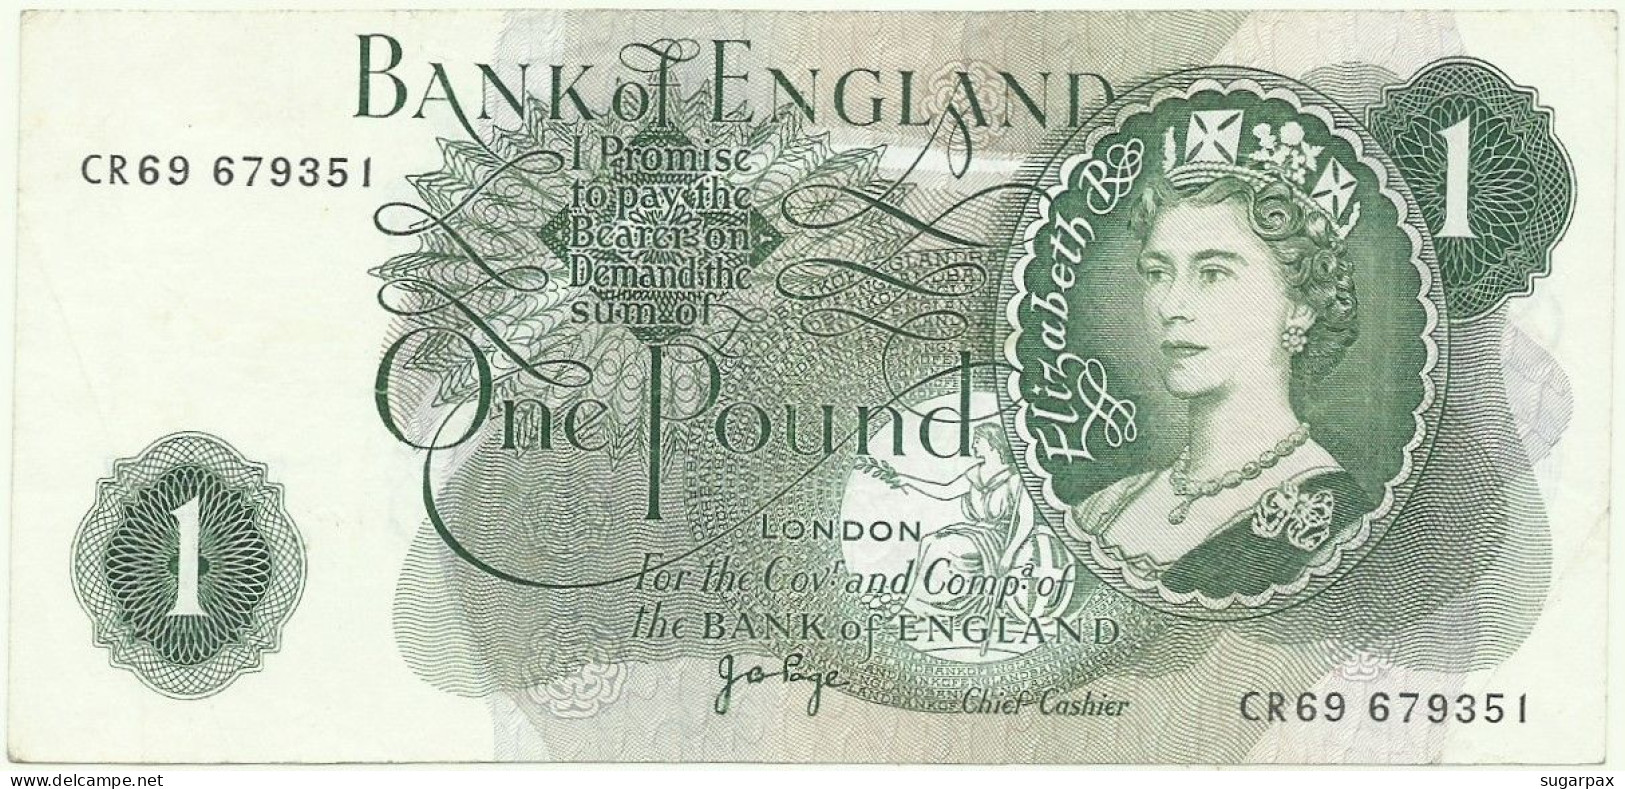 GREAT BRITAIN - 1 POUND - ND ( 1970-77 ) - P 374 G - Serie CR69 - BANK OF ENGLAND - United Kingdom - 1 Pound